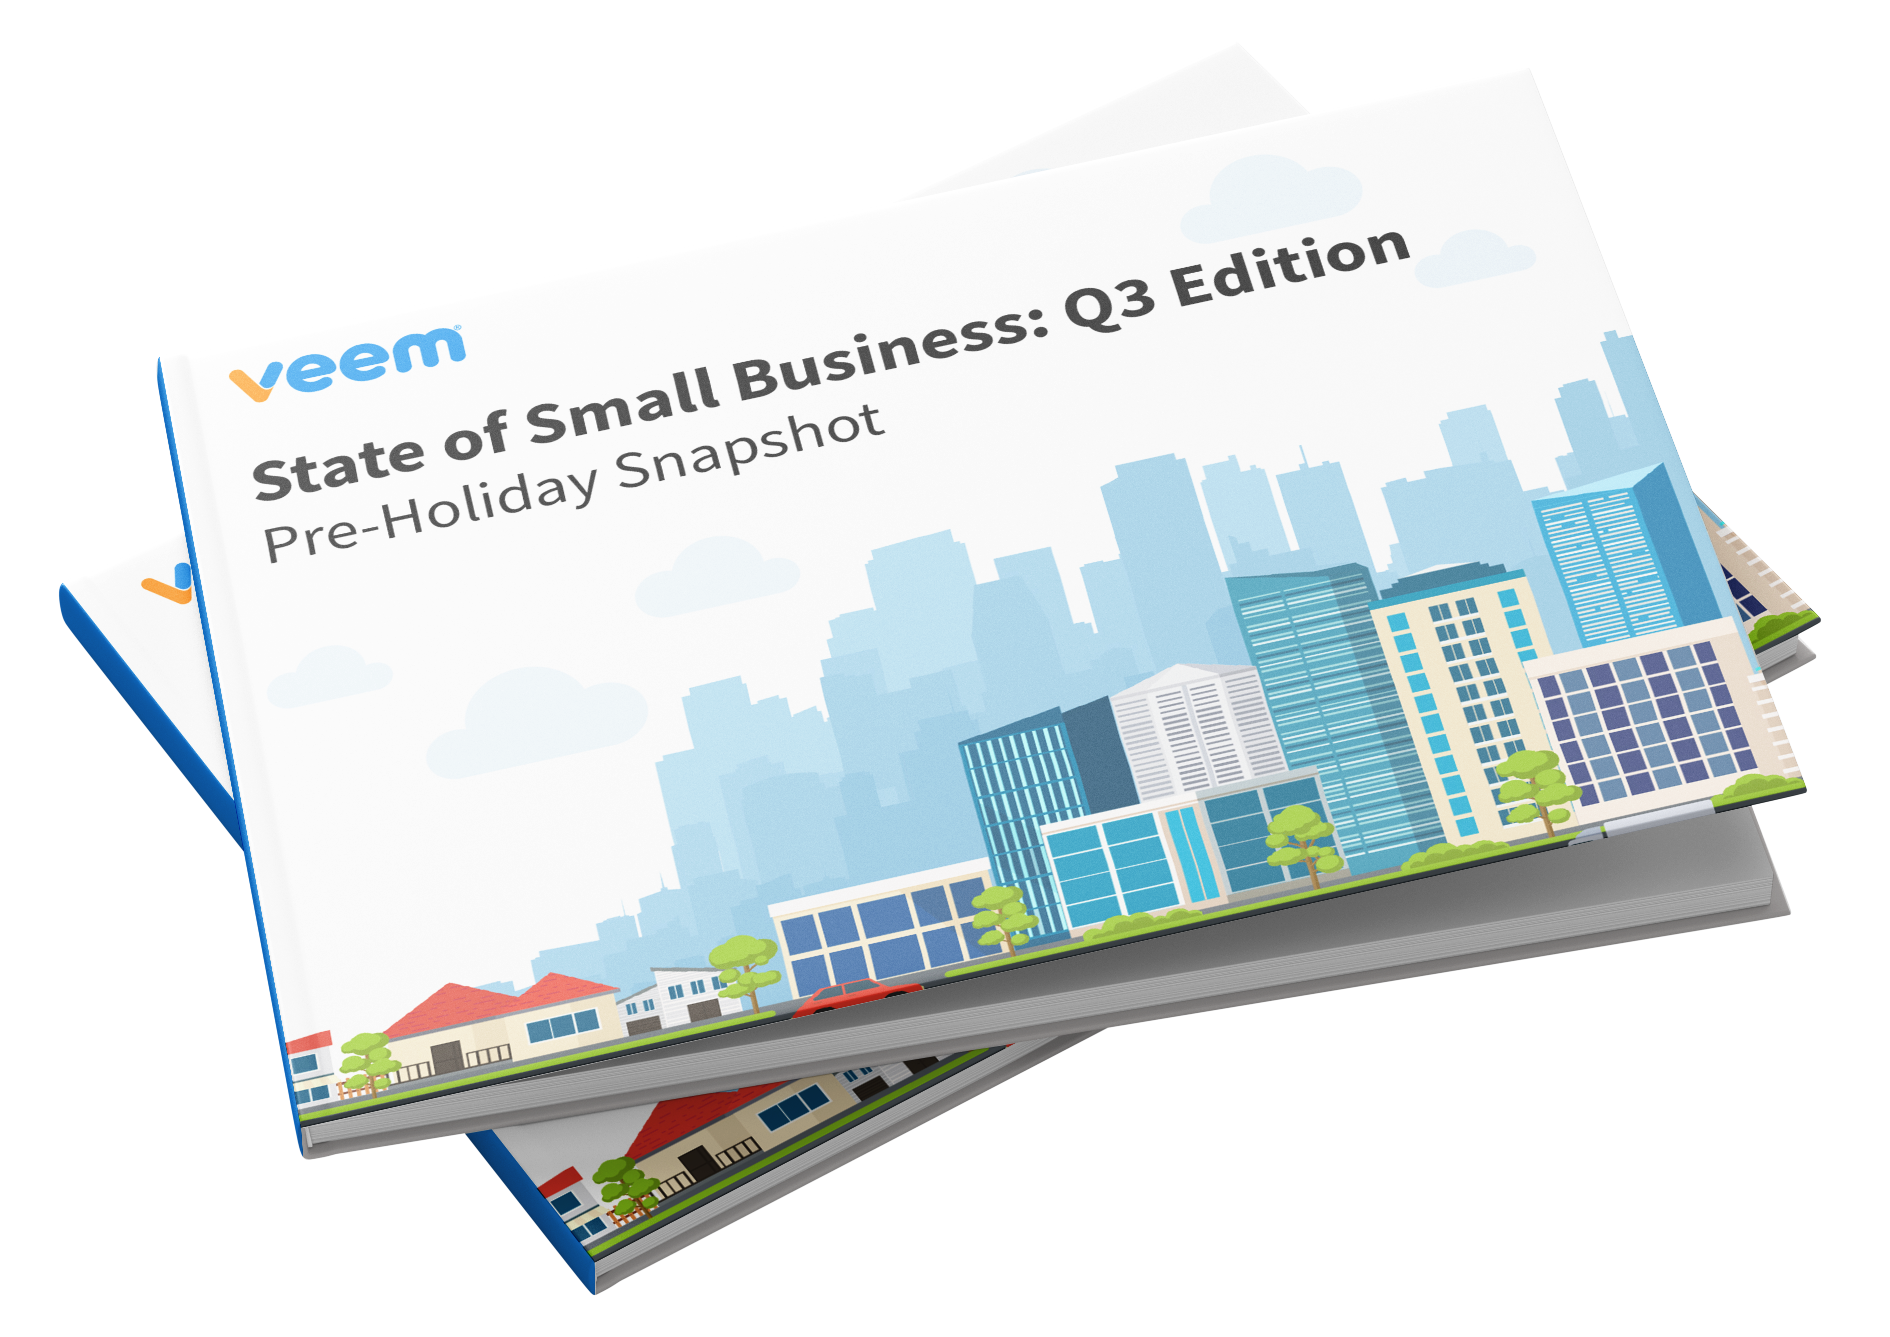 2020 State of Small Business: Q3 Edition
Pre-Holiday Snapshot

This quarter, business owners have found themselves completely reimagining how they do business. Themes explored in this report include the strategic changes small businesses have made or are making, as it applies to supply chain operations and partnerships.

This report marks the second edition of Veem’s State of Small Business report, which Veem releases on a quarterly basis. The first edition, released in May, covered small business sentiment in Q2, as well as themes such as supply chain disruption, economic confidence and business innovations.